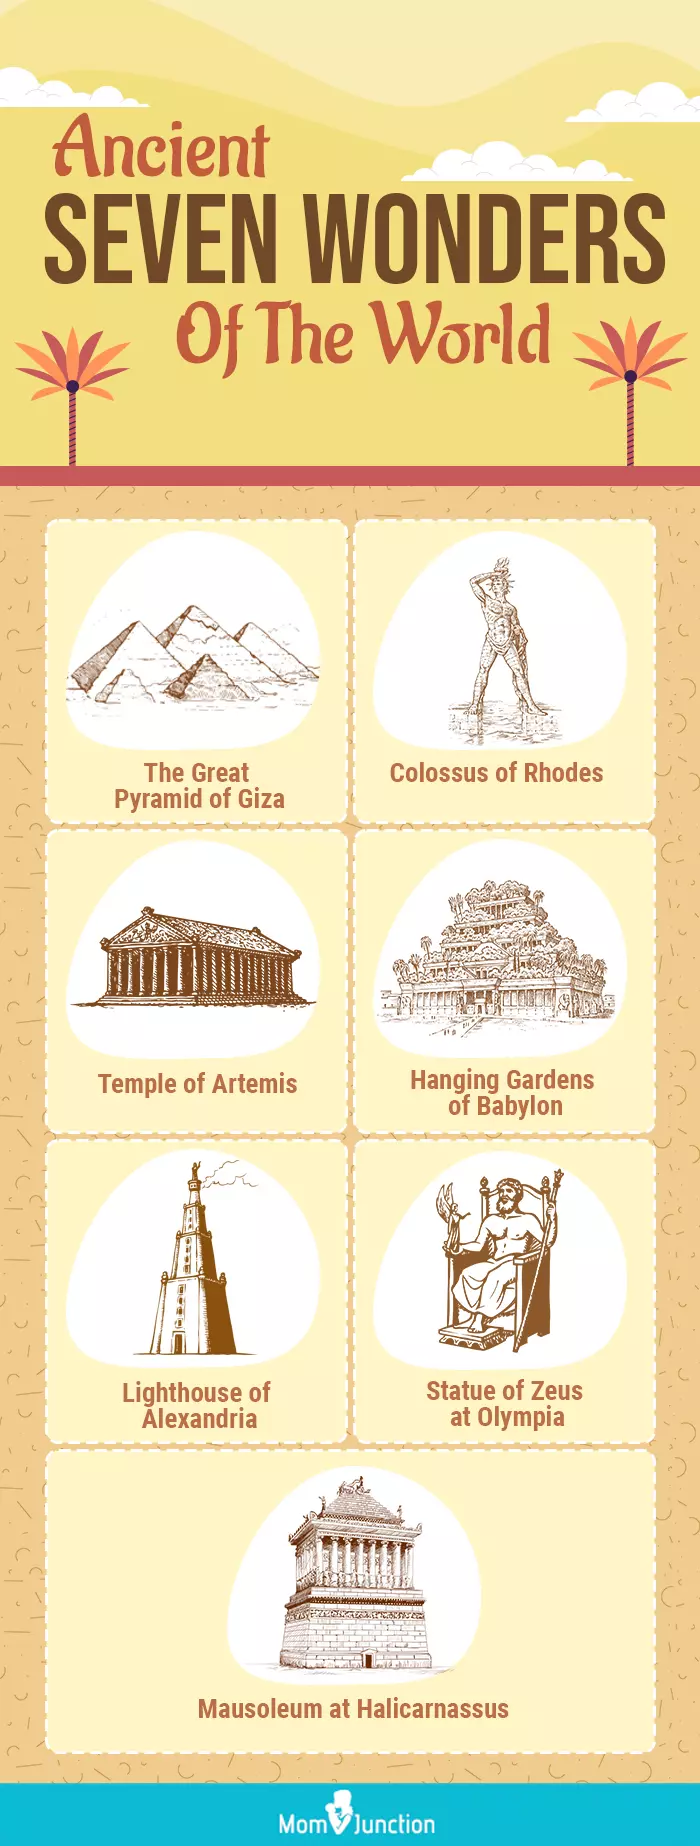 ancient seven wonders of the world (infographic)